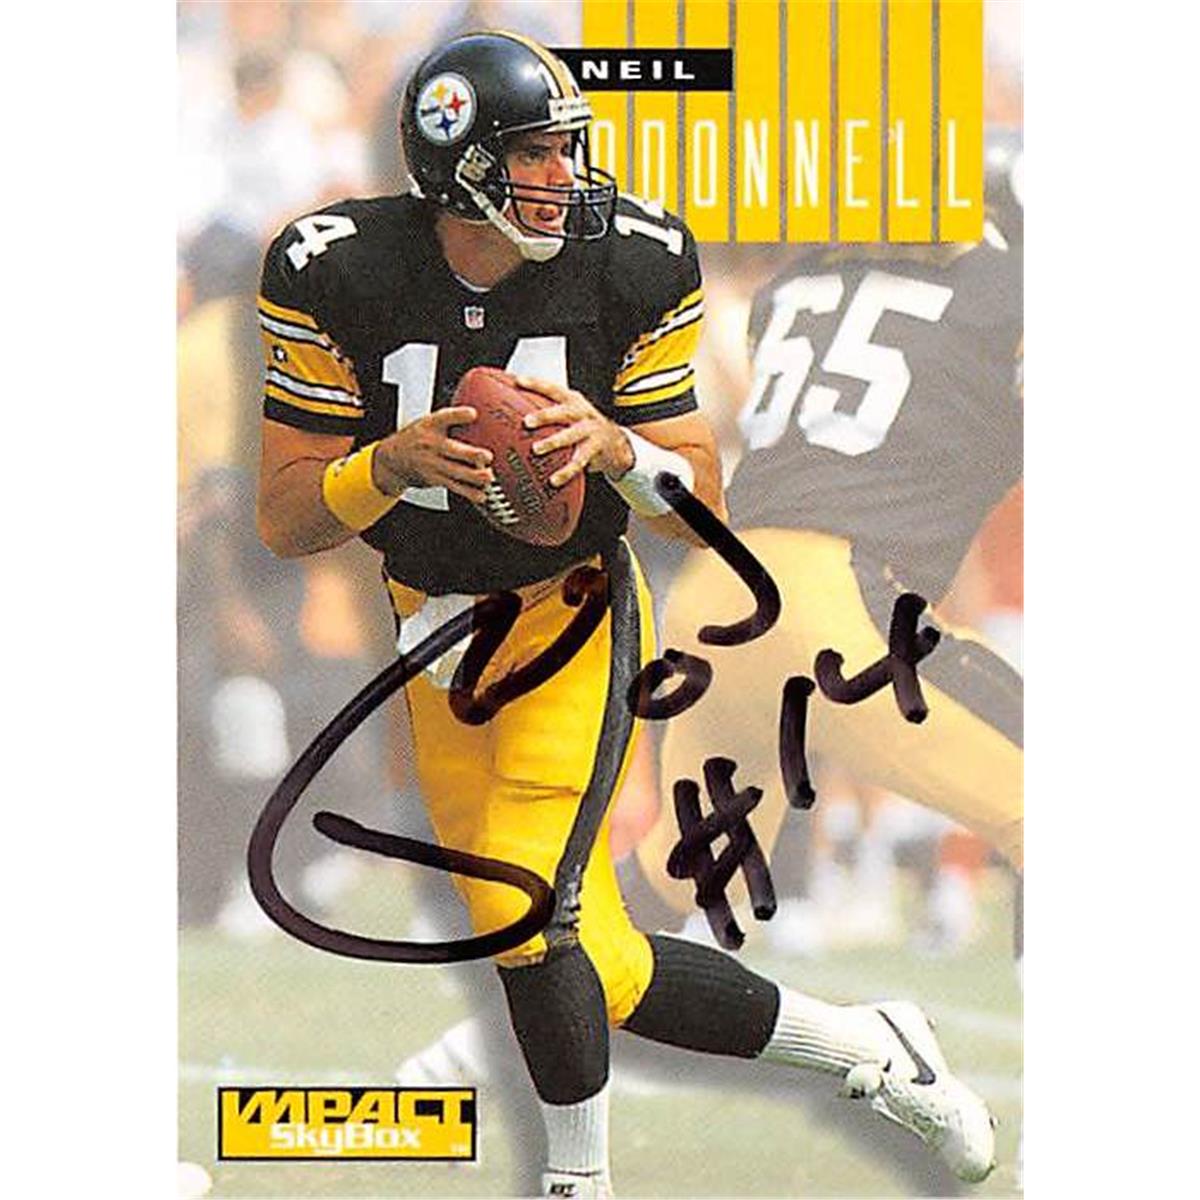 377727 Neil Odonnell Autographed Football Card - 1994 Skybox Impact No. 210 -  Autograph Warehouse